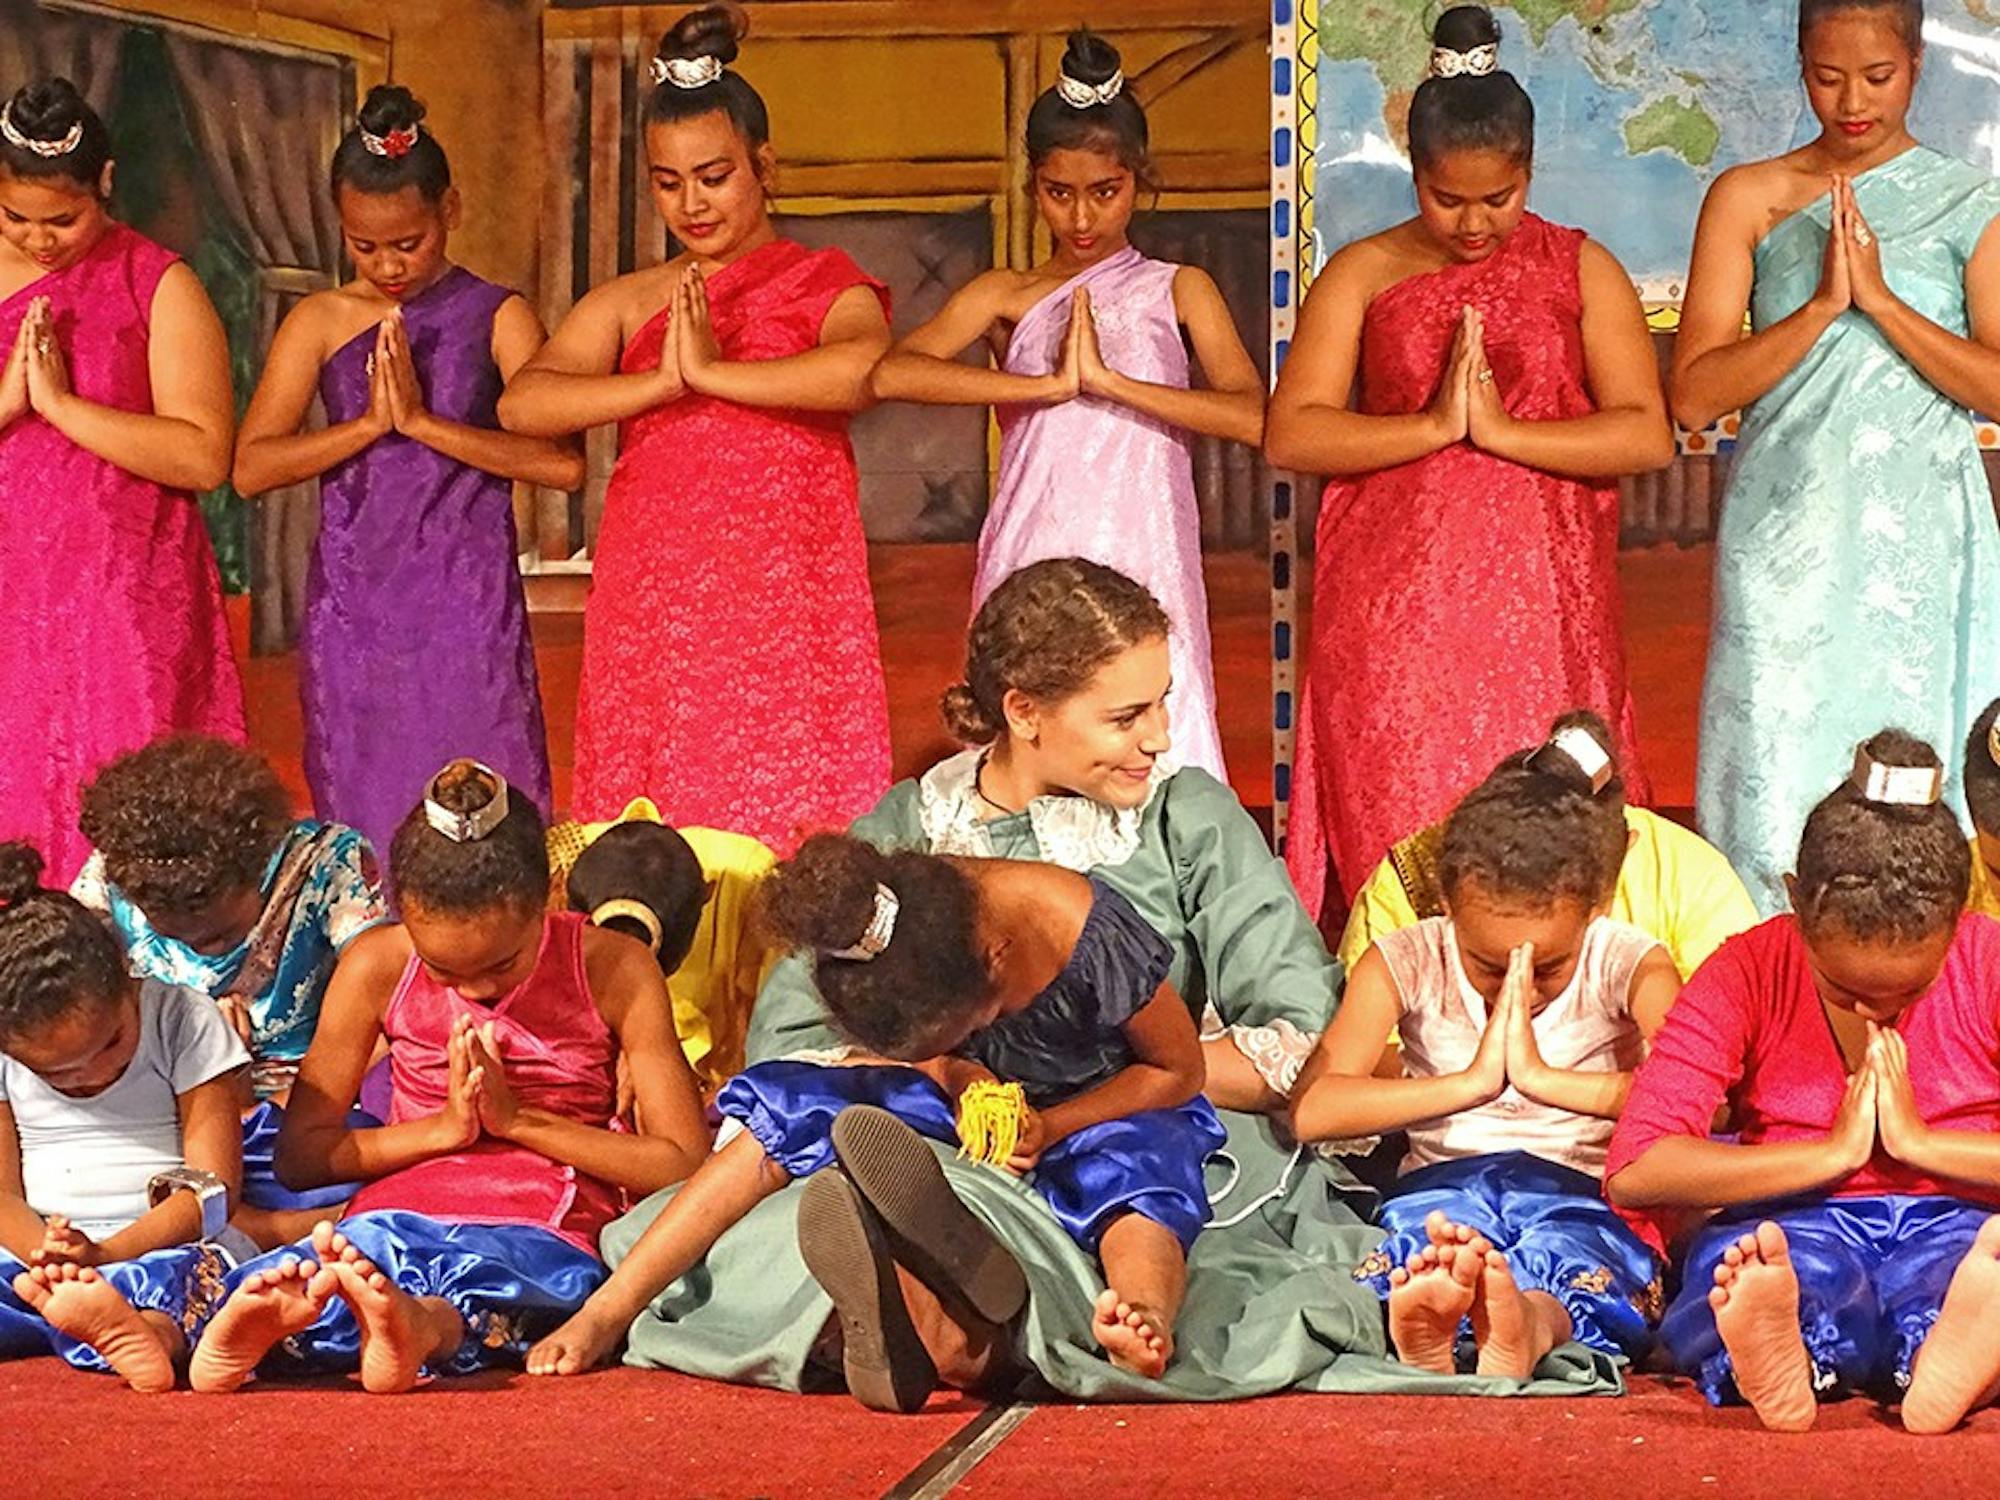 Justine Goggin ’18 spent her off-term in the Marshall Islands and performed in a bilingual production of “The King and I.”